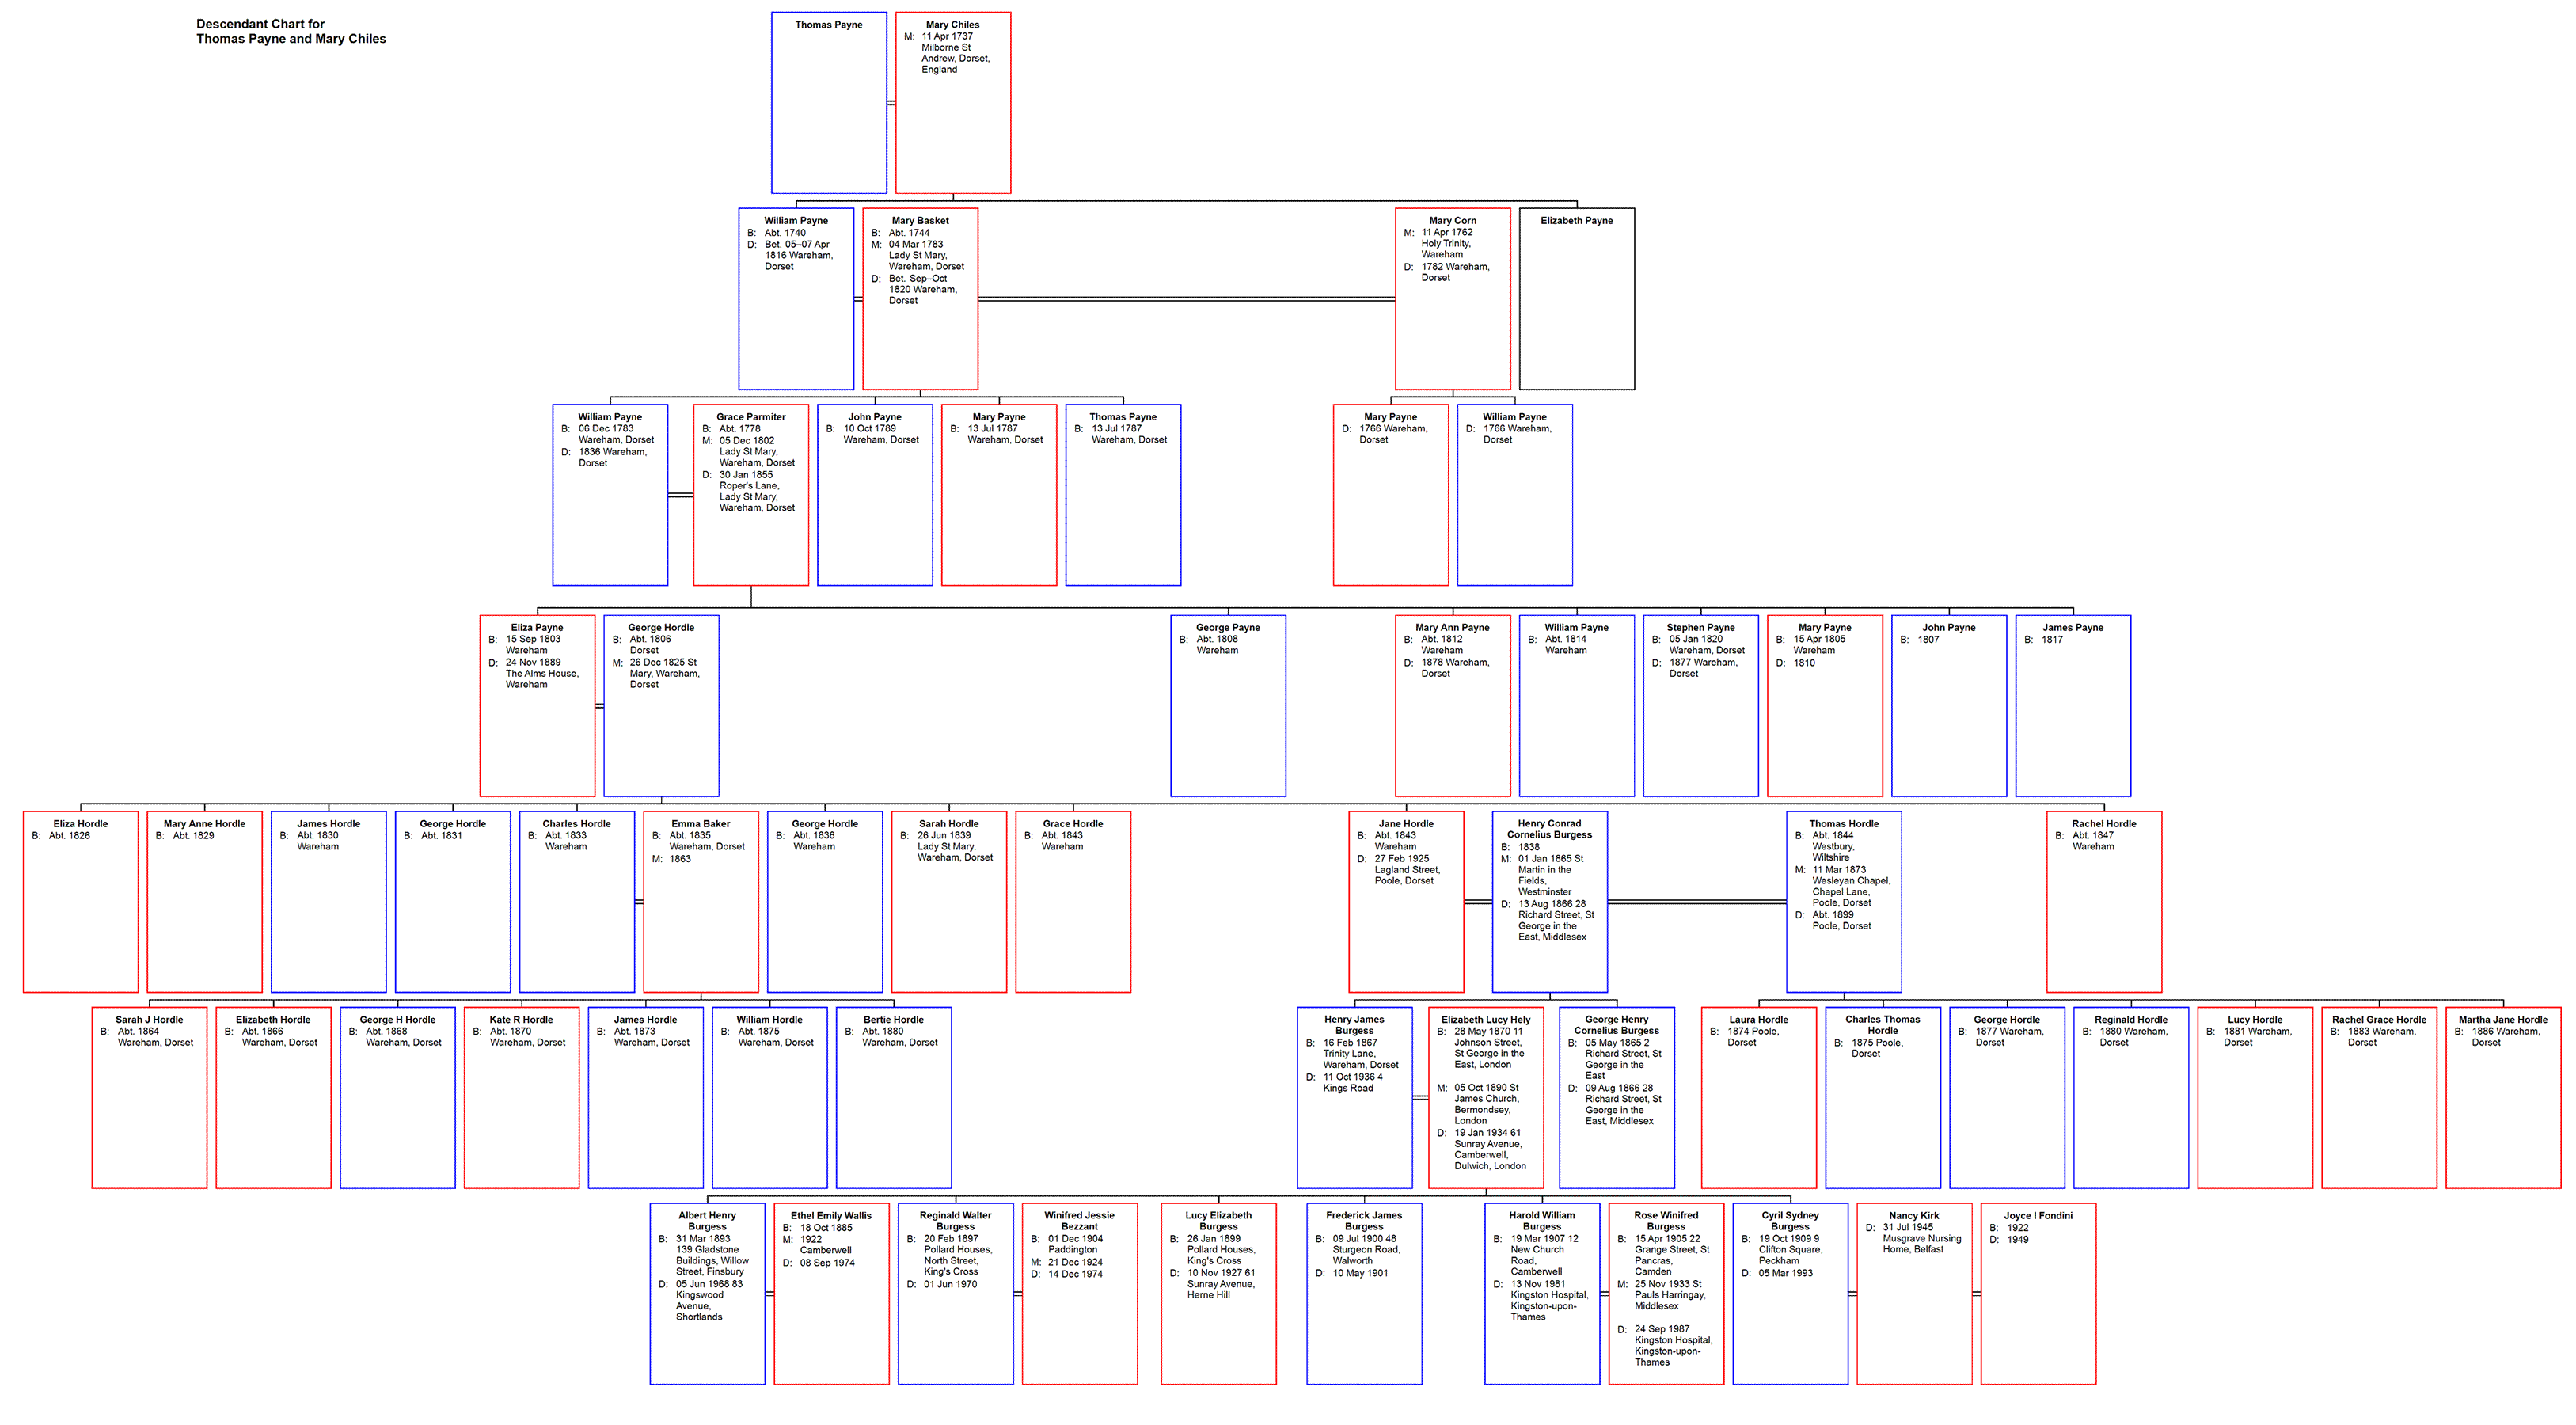 Descendant Chart for Thomas Payne and Mary Chiles